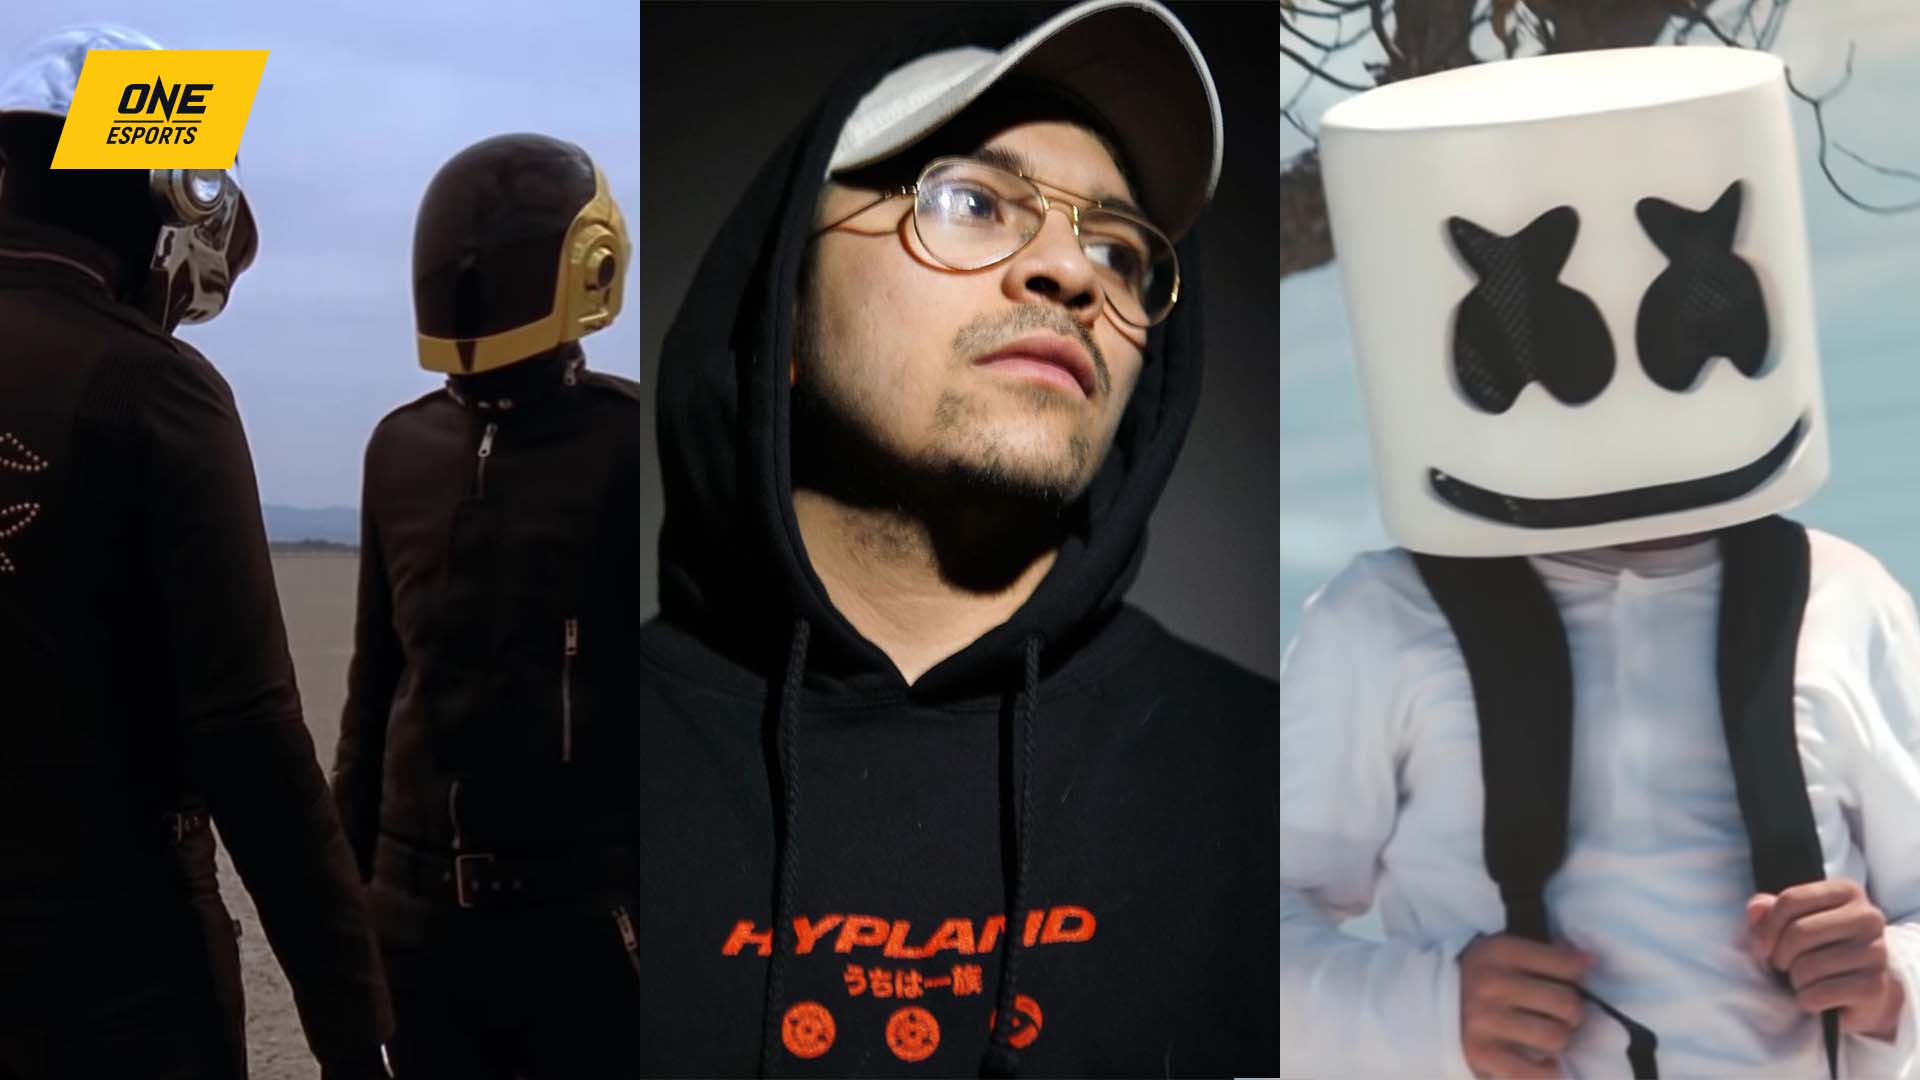 Side by side of Daft Punk, Repullze, and Marshmello